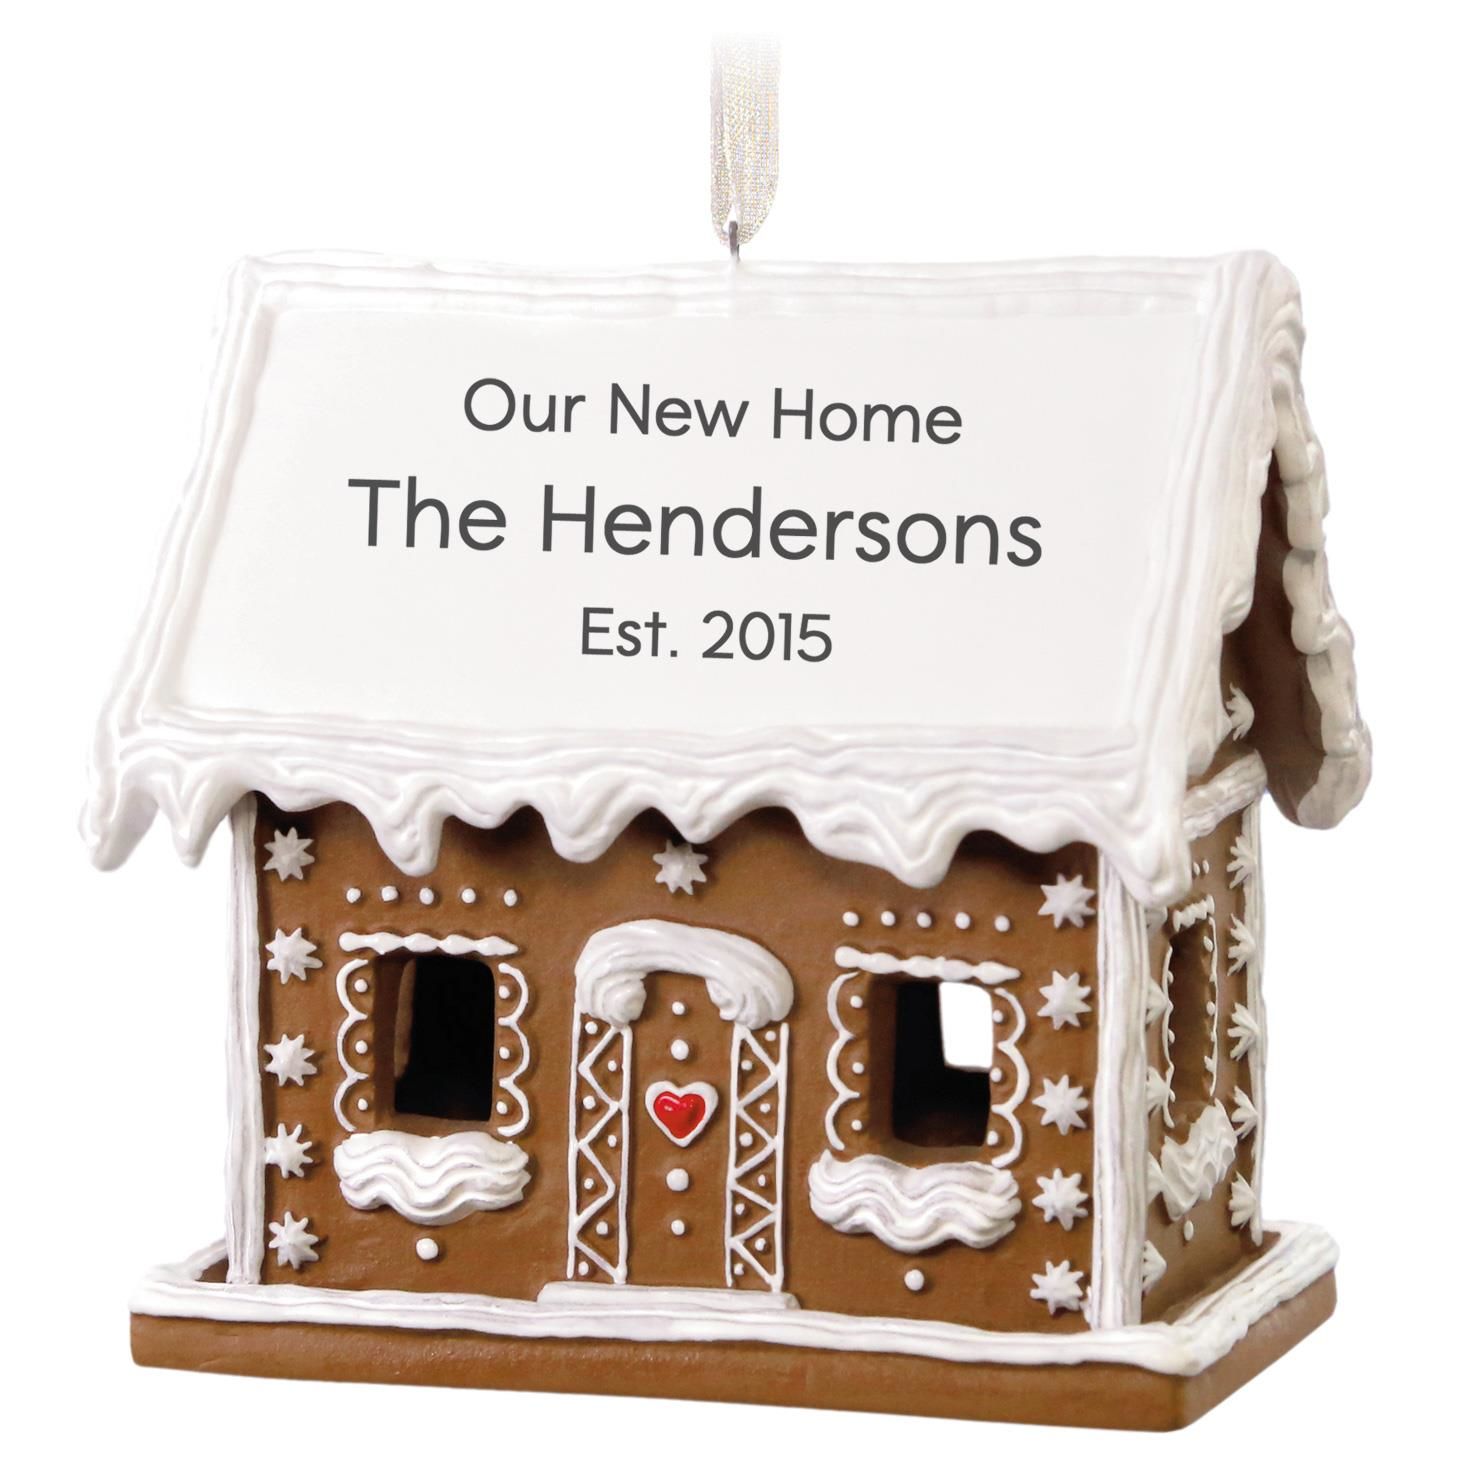 gingerbread-house-personalized-ornament-root-2995qhe1719b1_1470_1